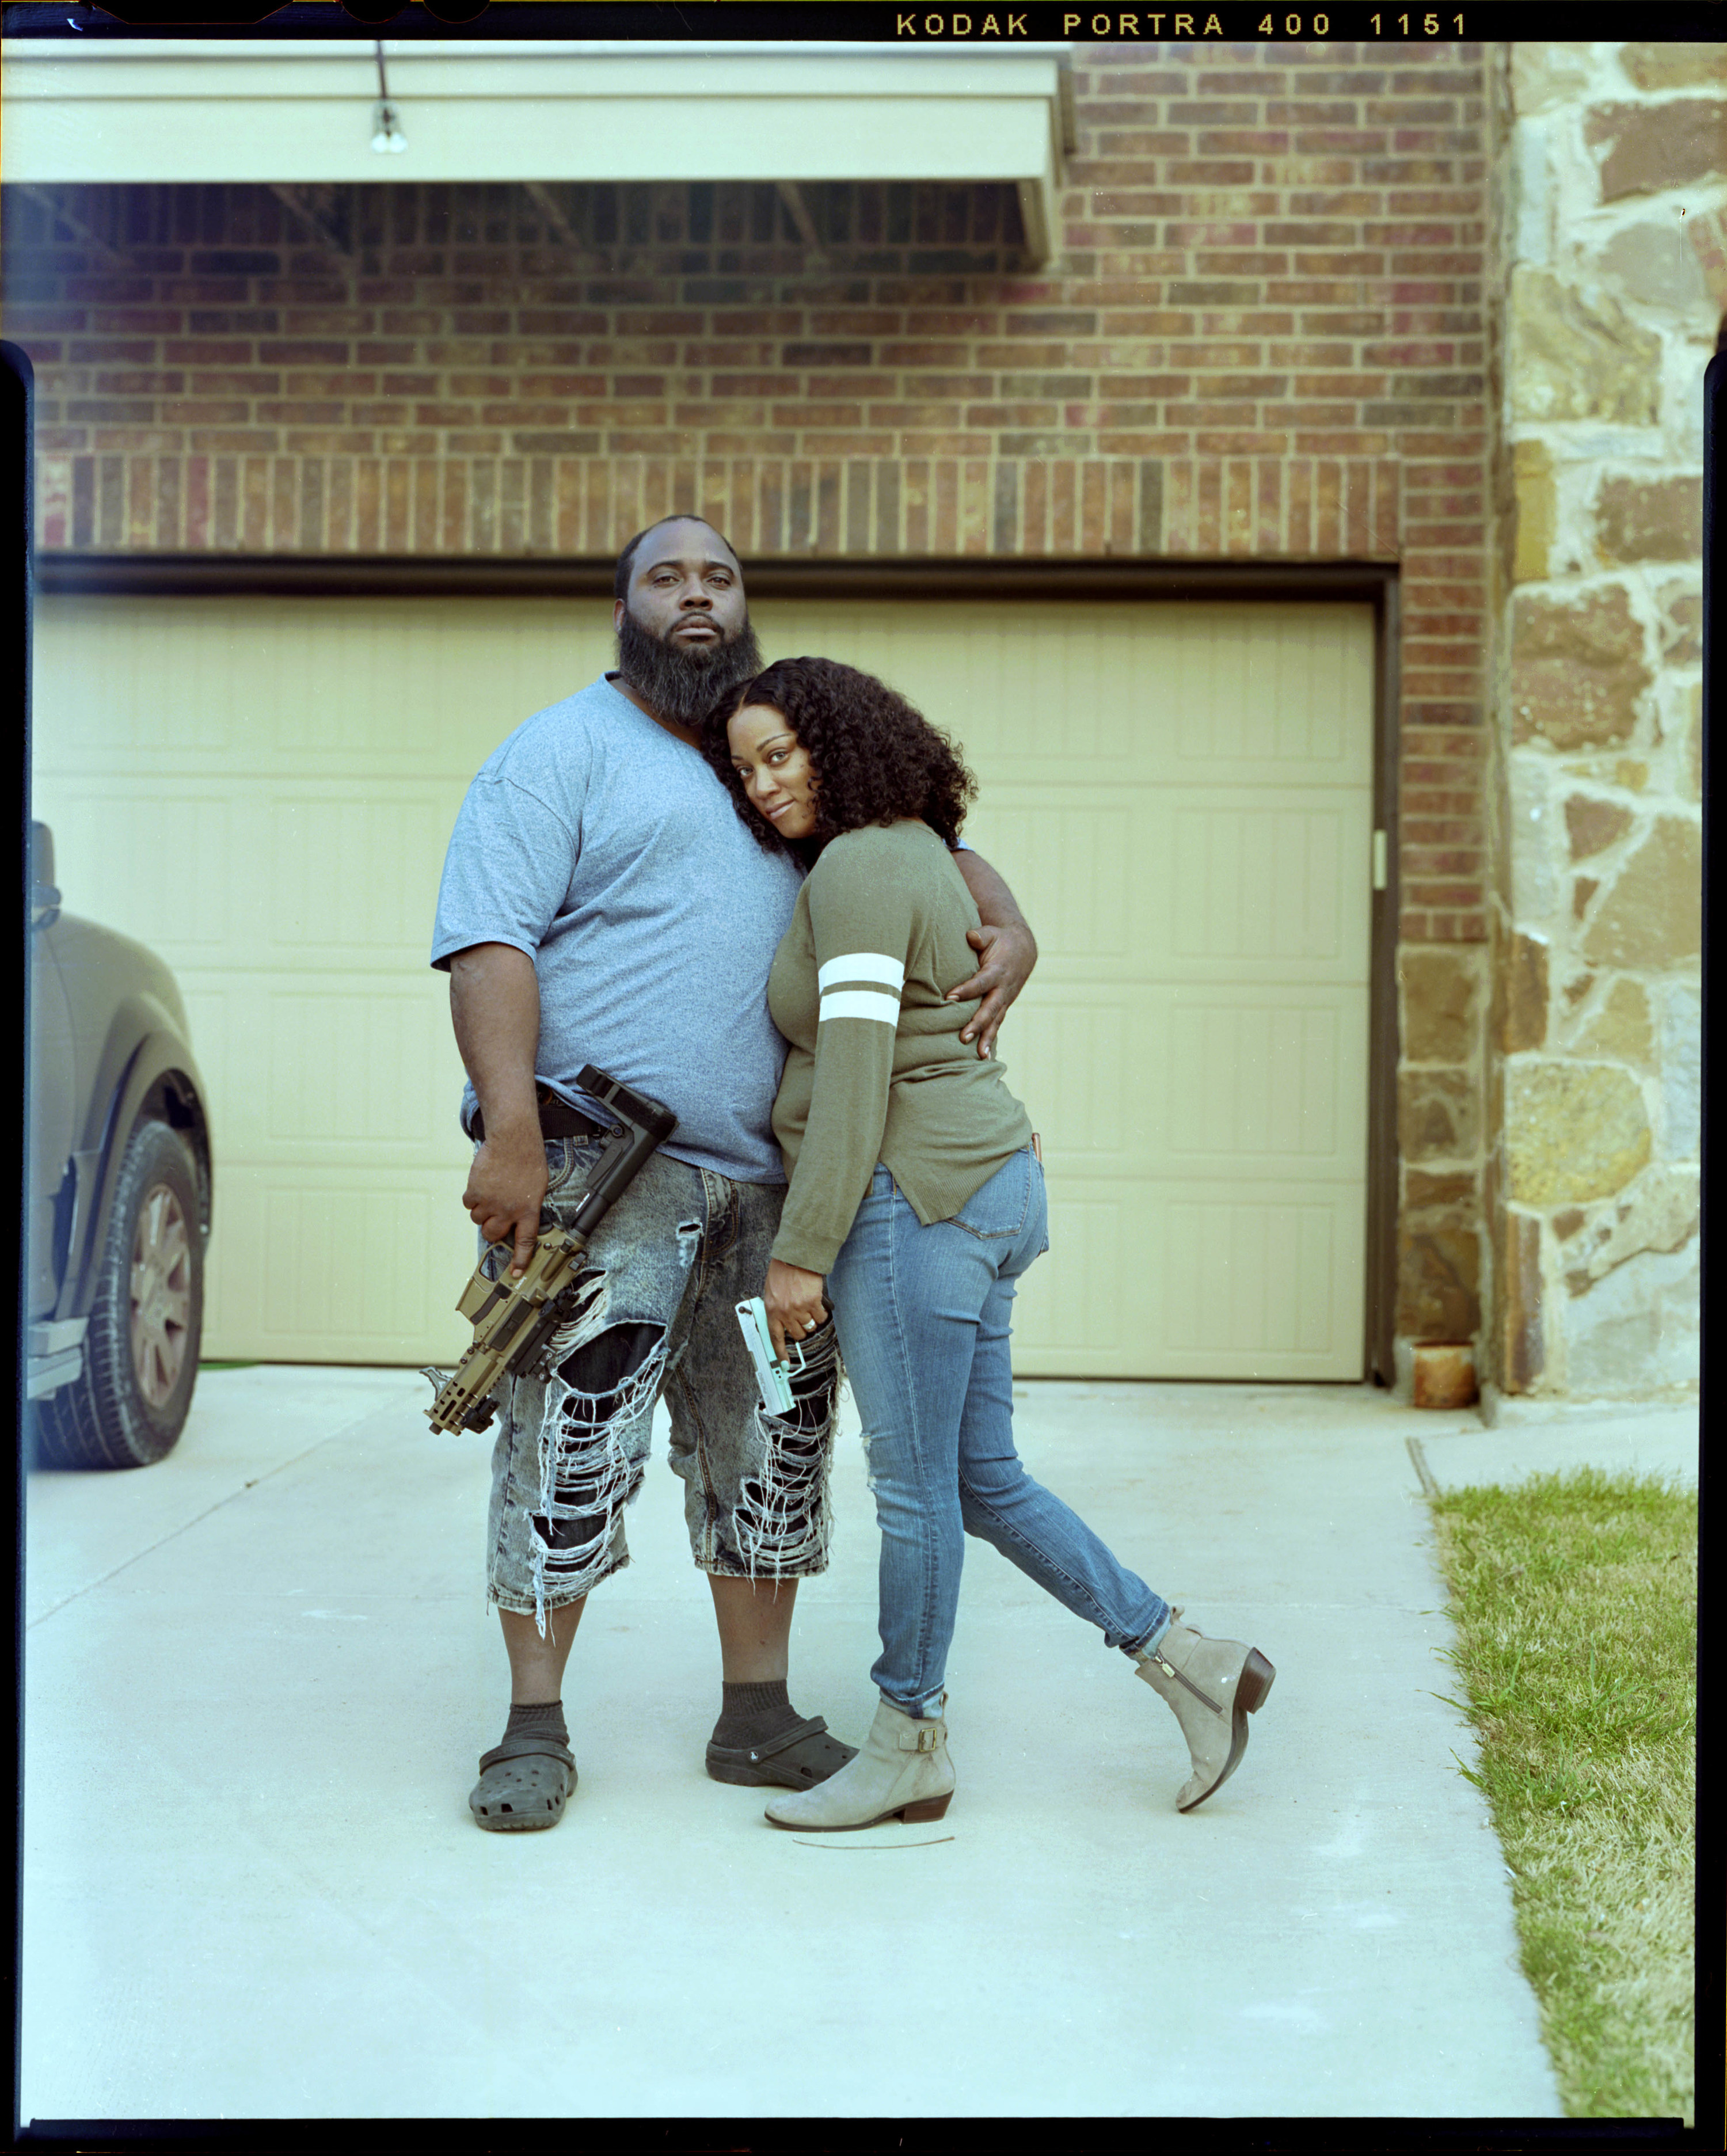 A couple embracing in front of their garage, each is holding a gun which they display for the camera